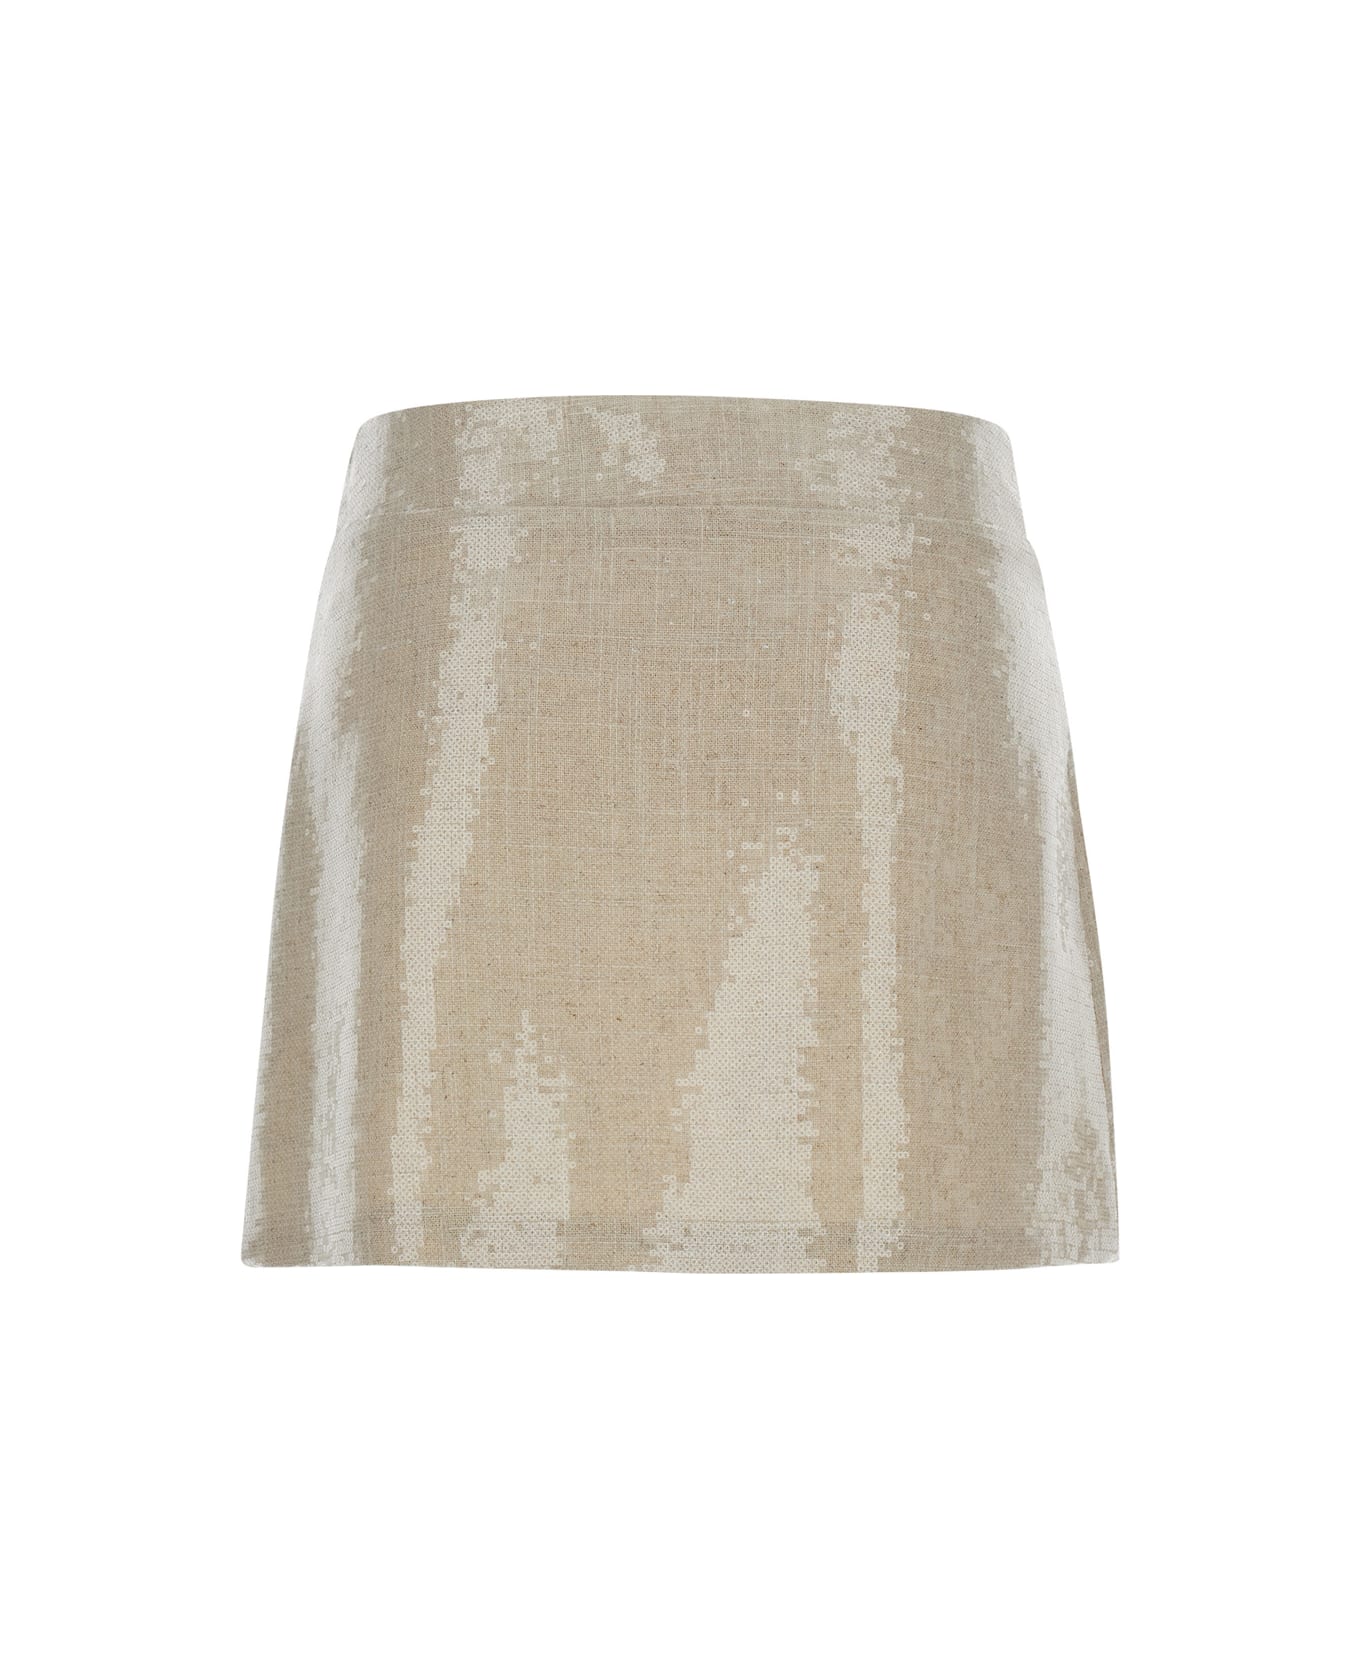 Federica Tosi Biege Mini Skirt With Sequins In Linen Blend Woman - Beige